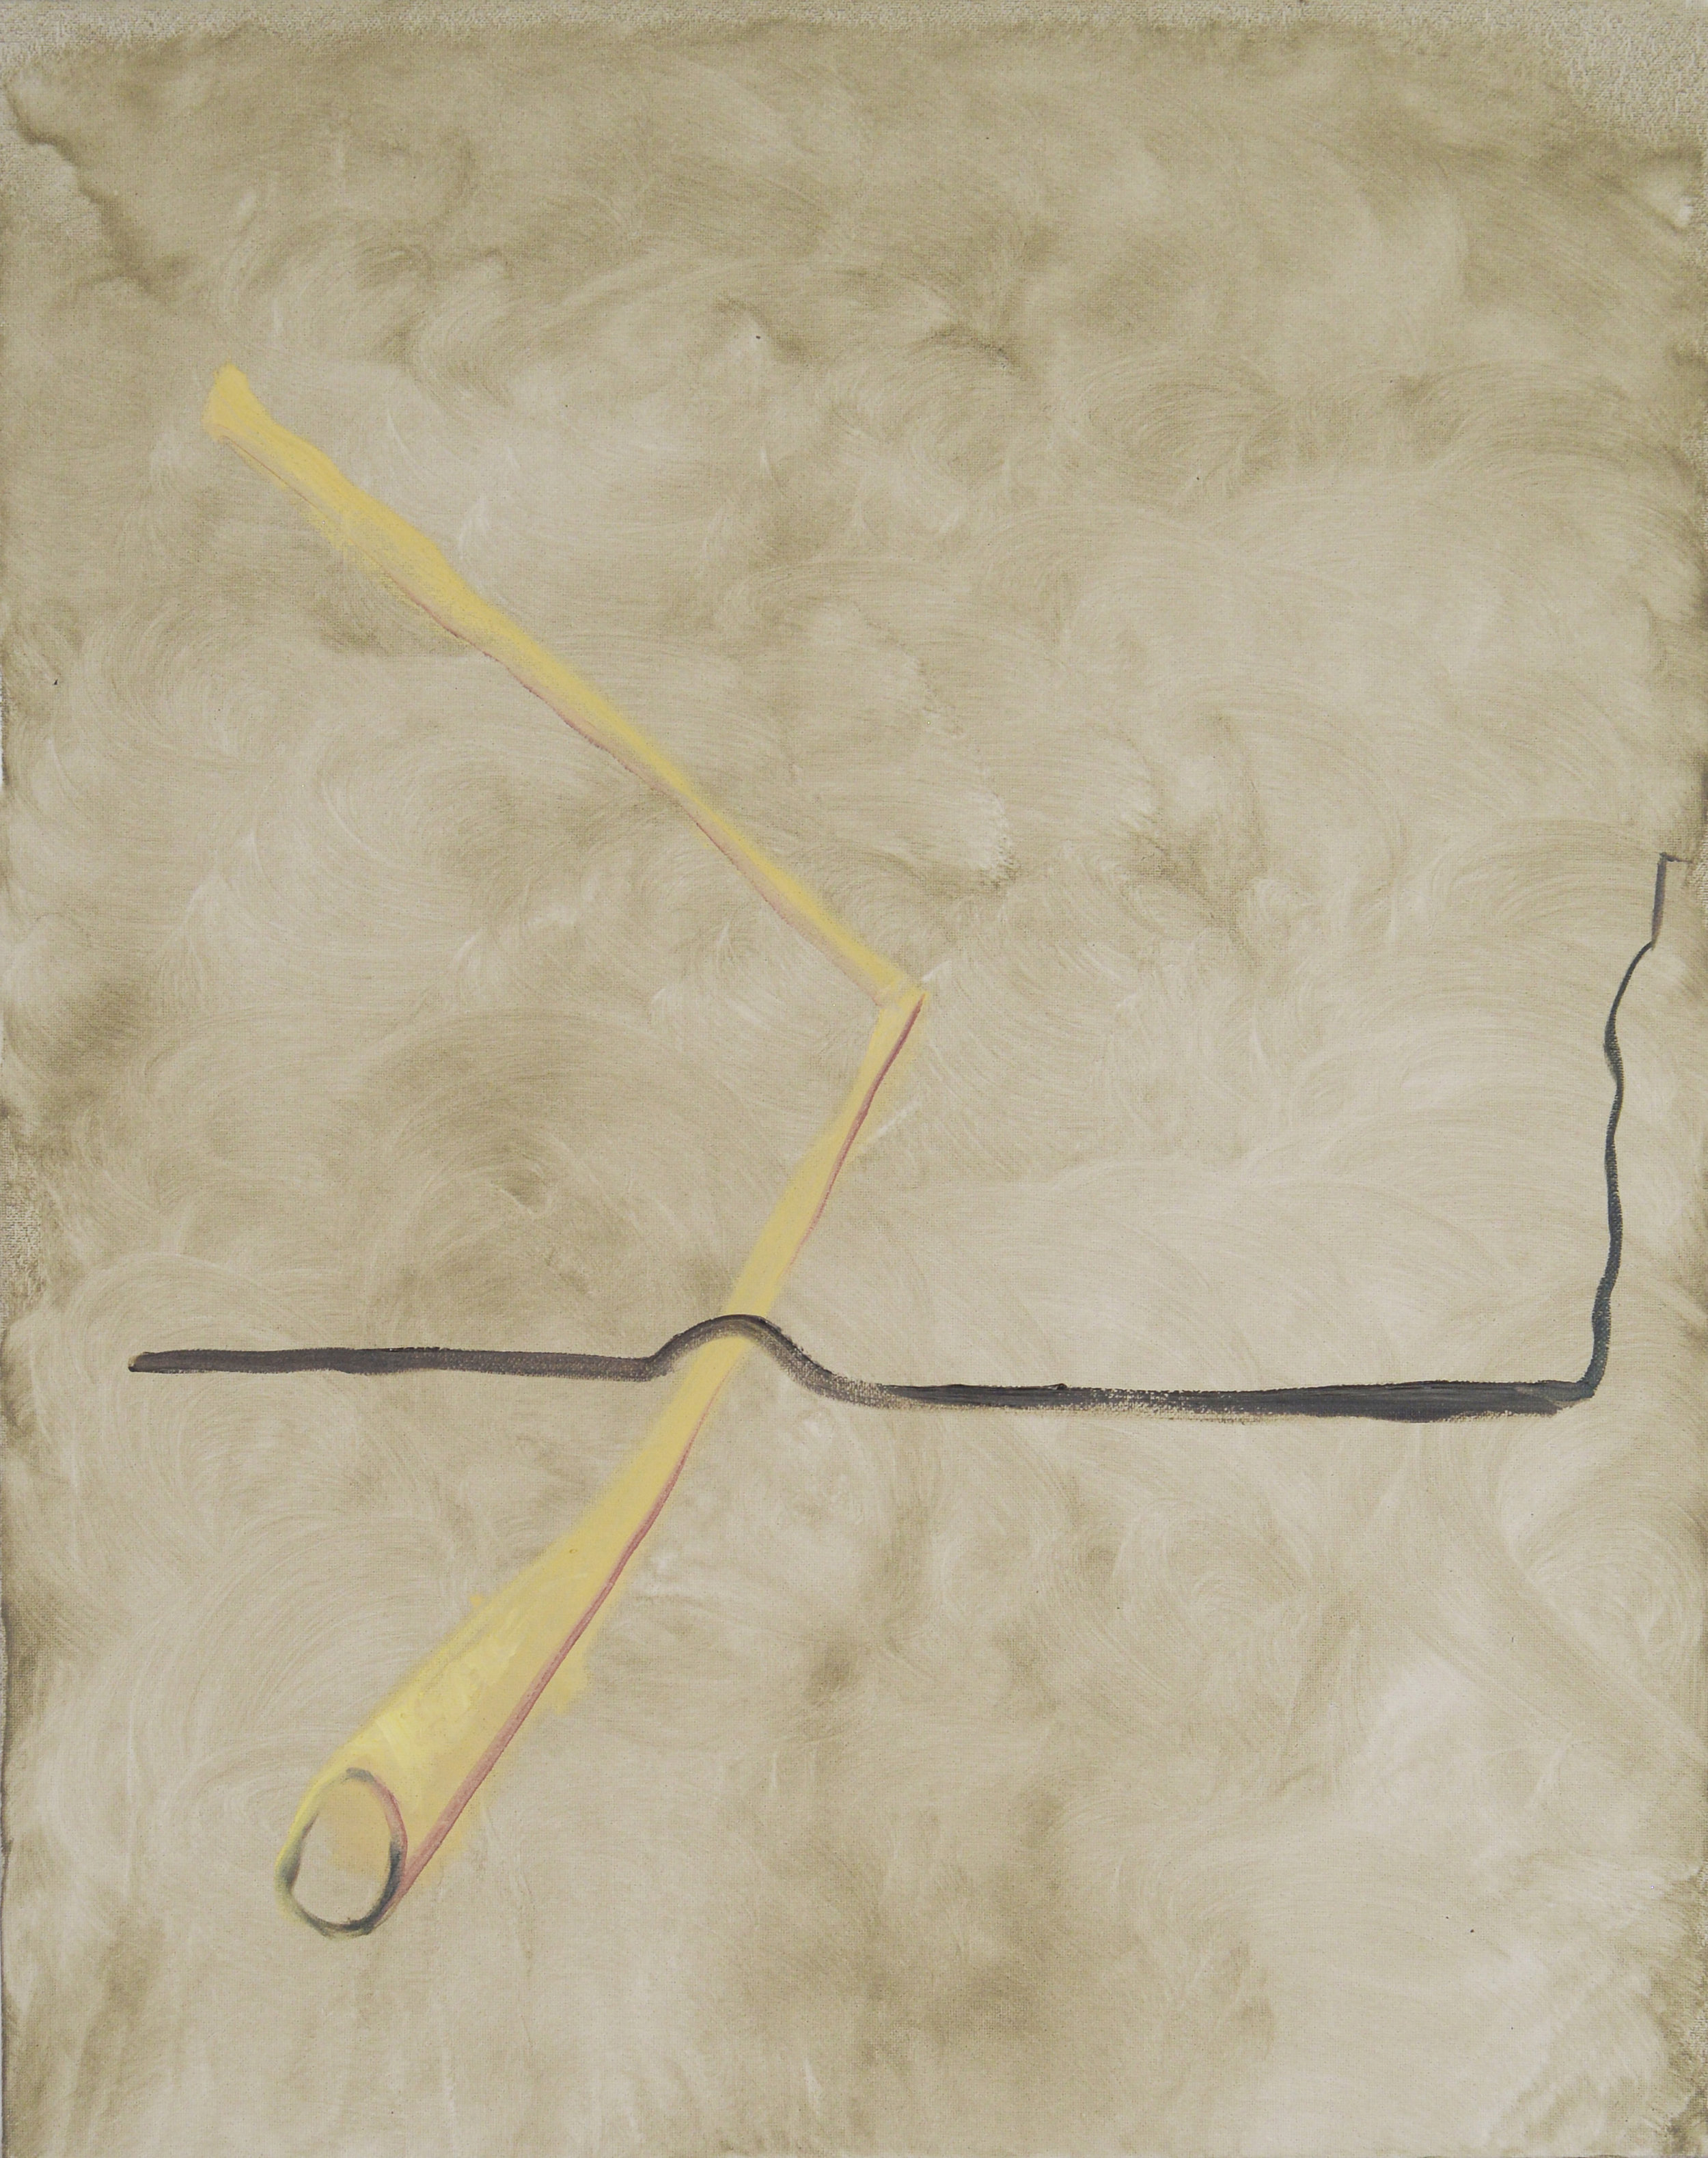 Pipe, 2013, Oil on canvas, 50 x 40 cm